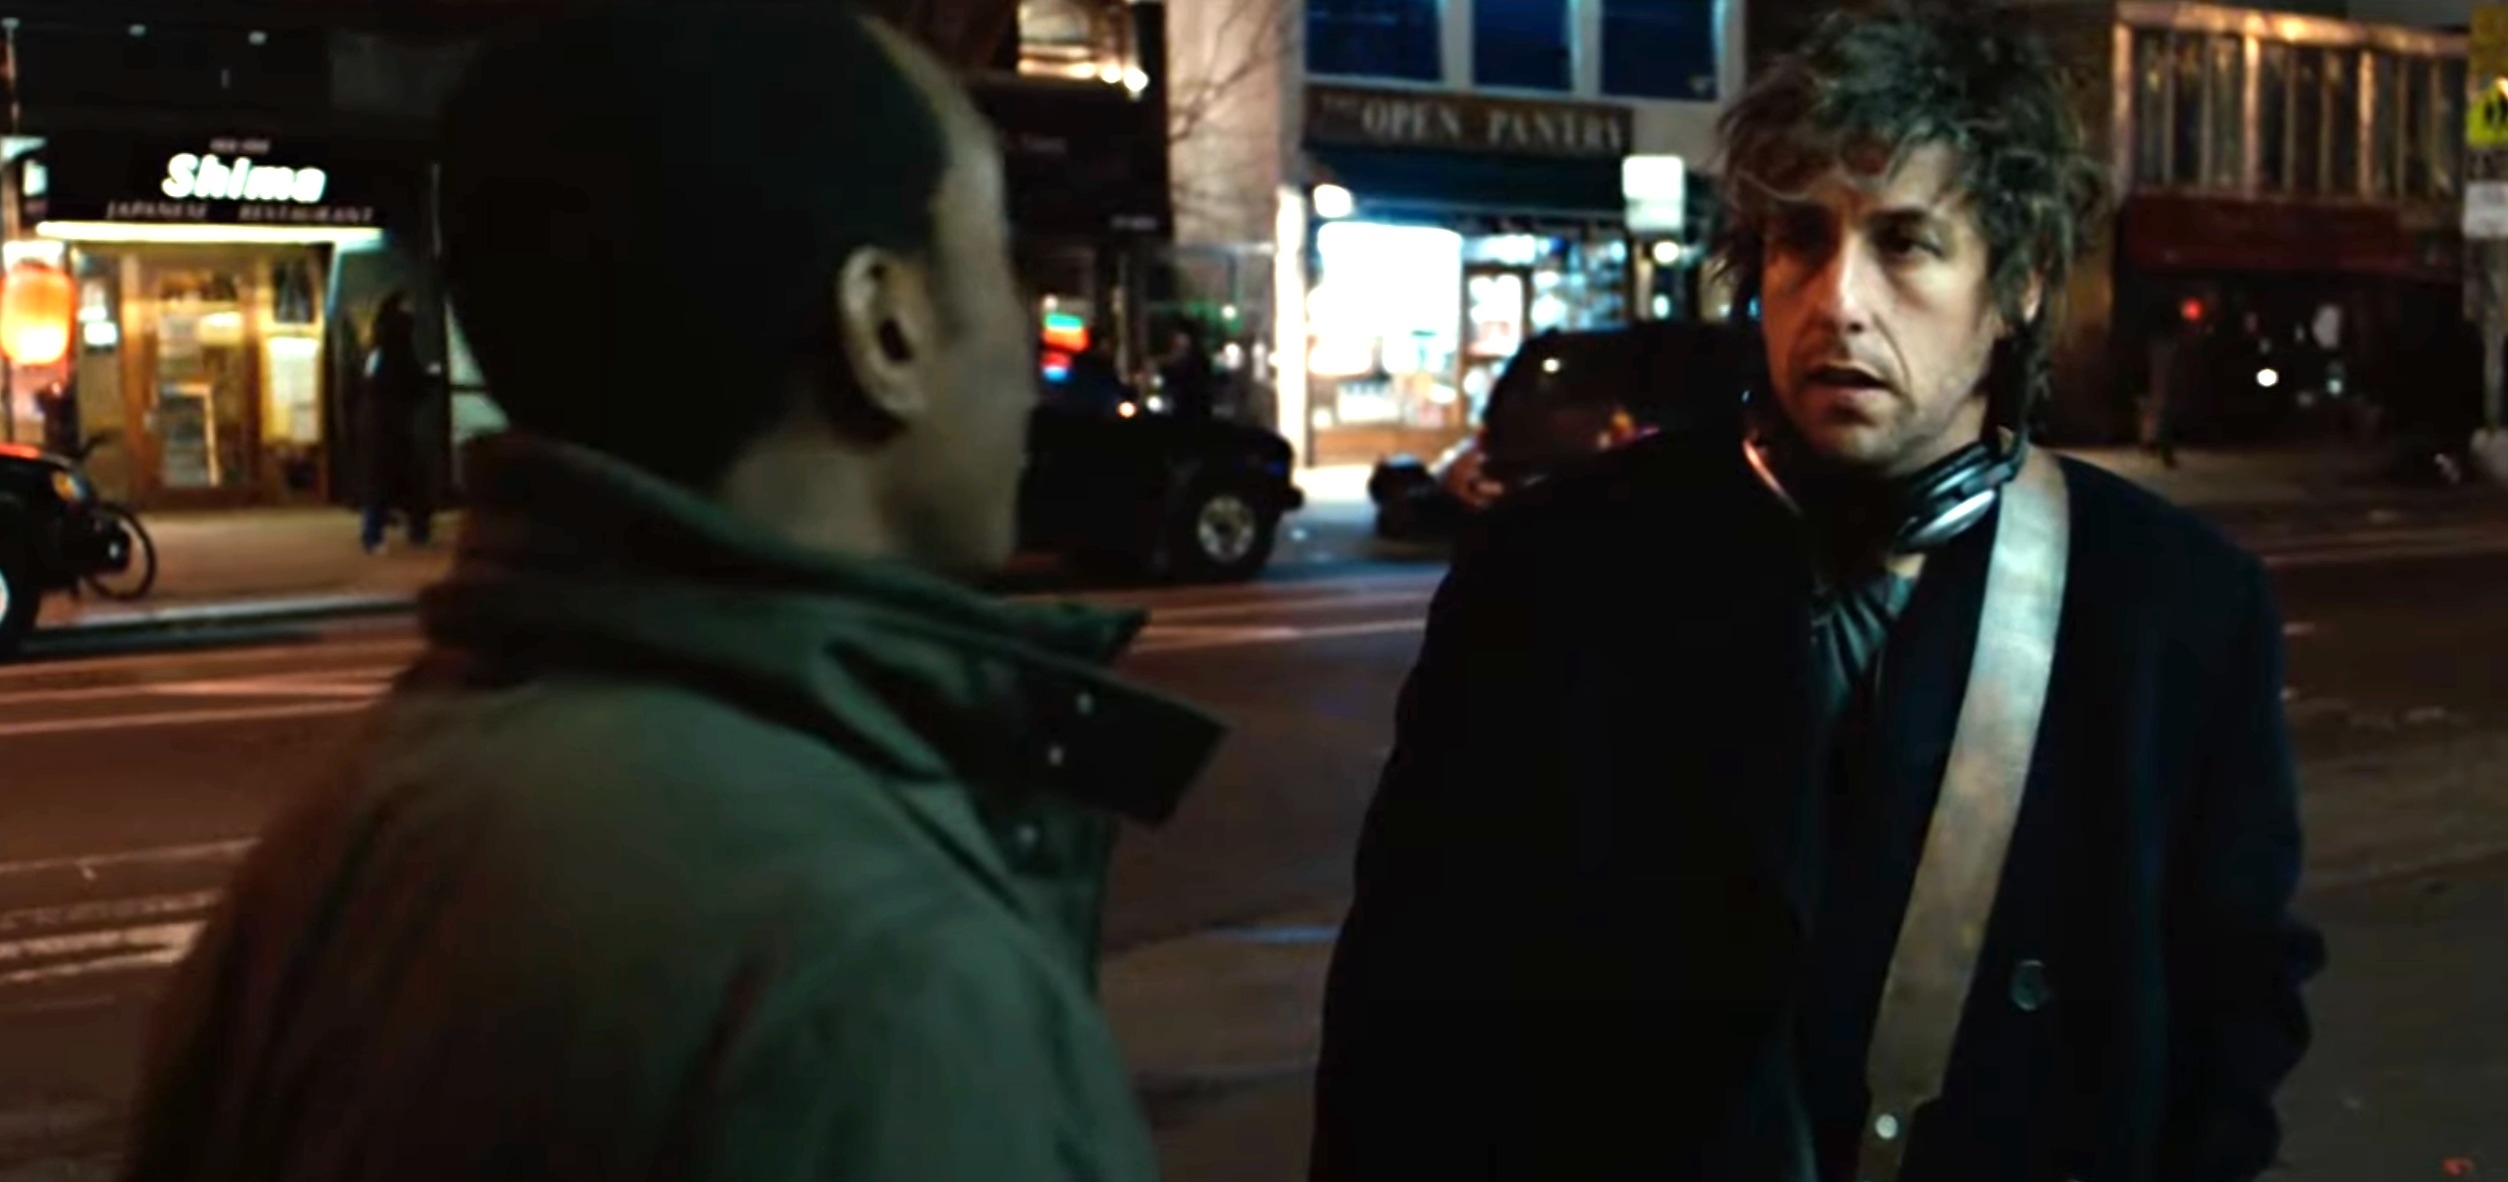 Don Cheadle and Adam Sandler in a scene, standing on a street at night, engaged in conversation